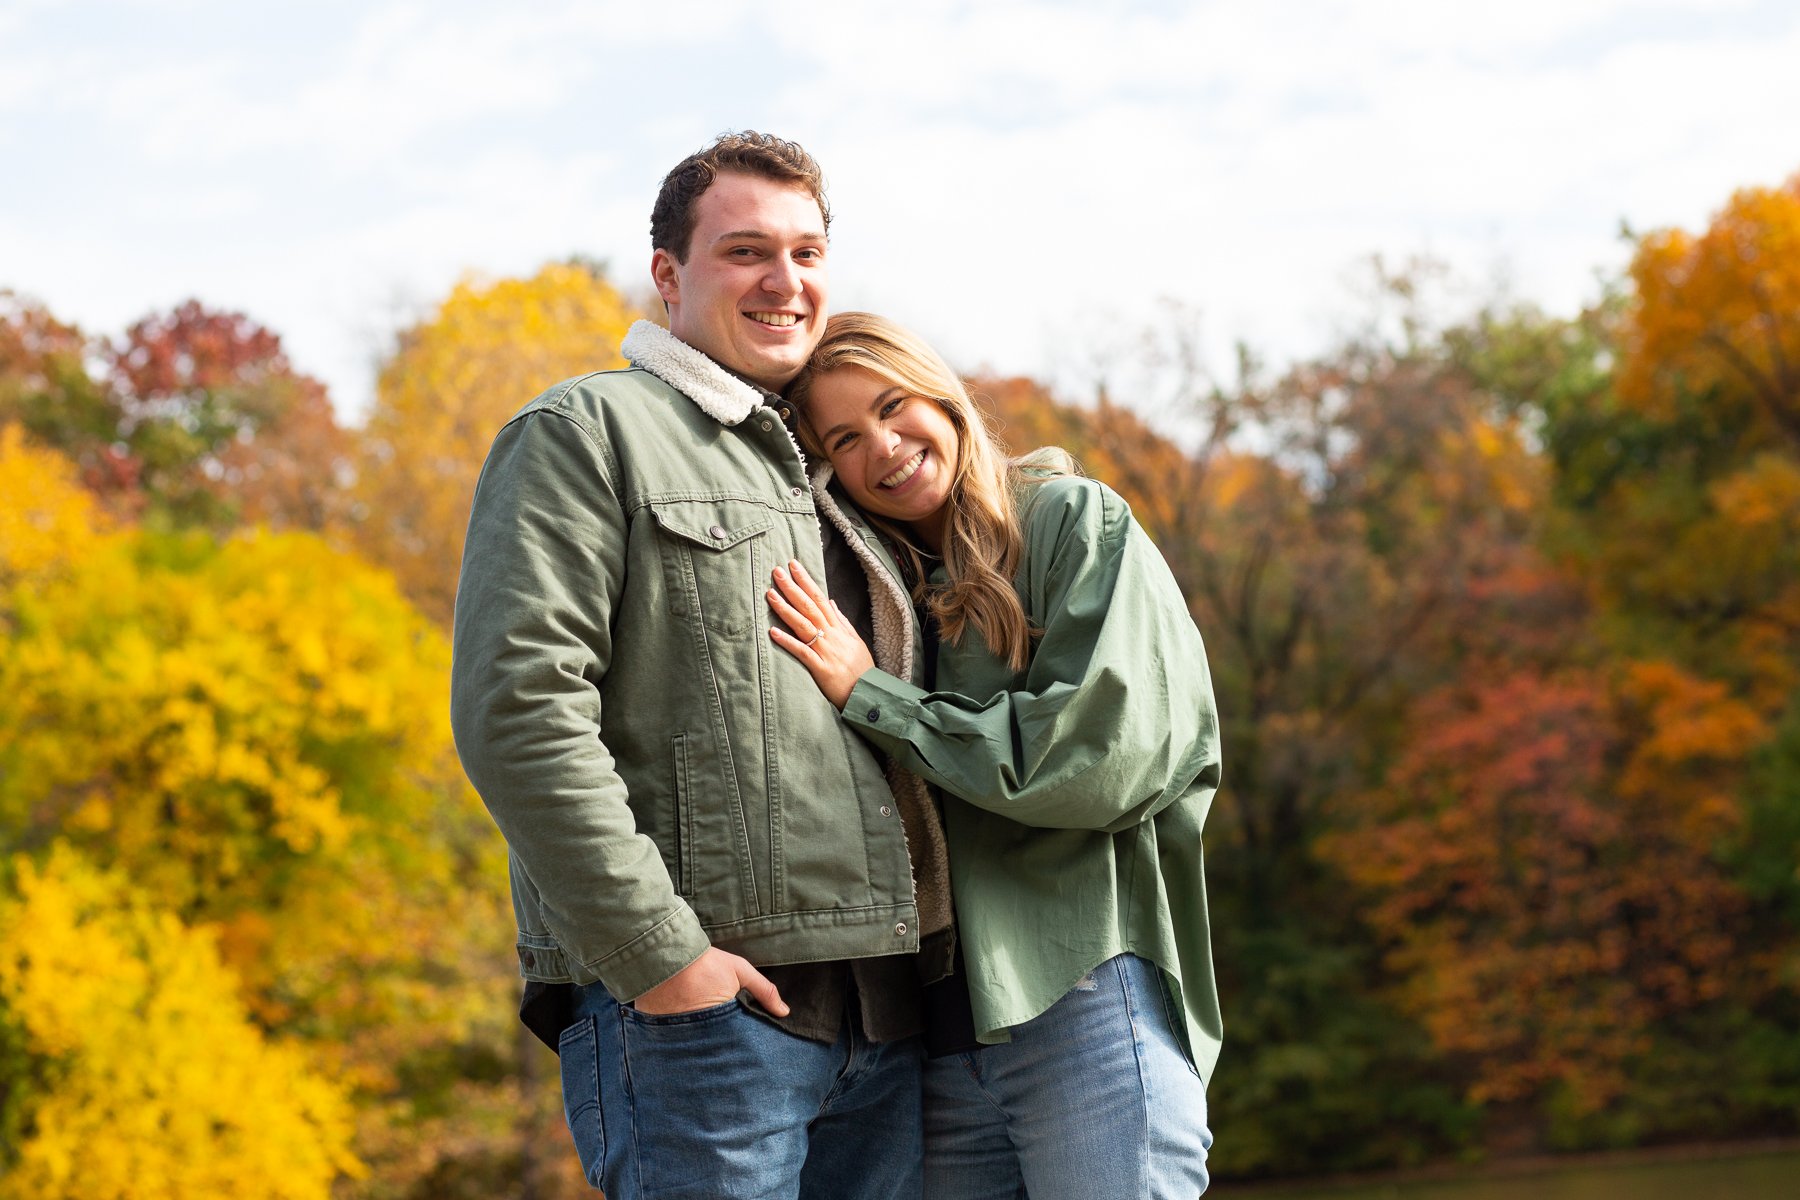 Central Park NYC Fall Foliage Proposal Photographer_0003.jpg